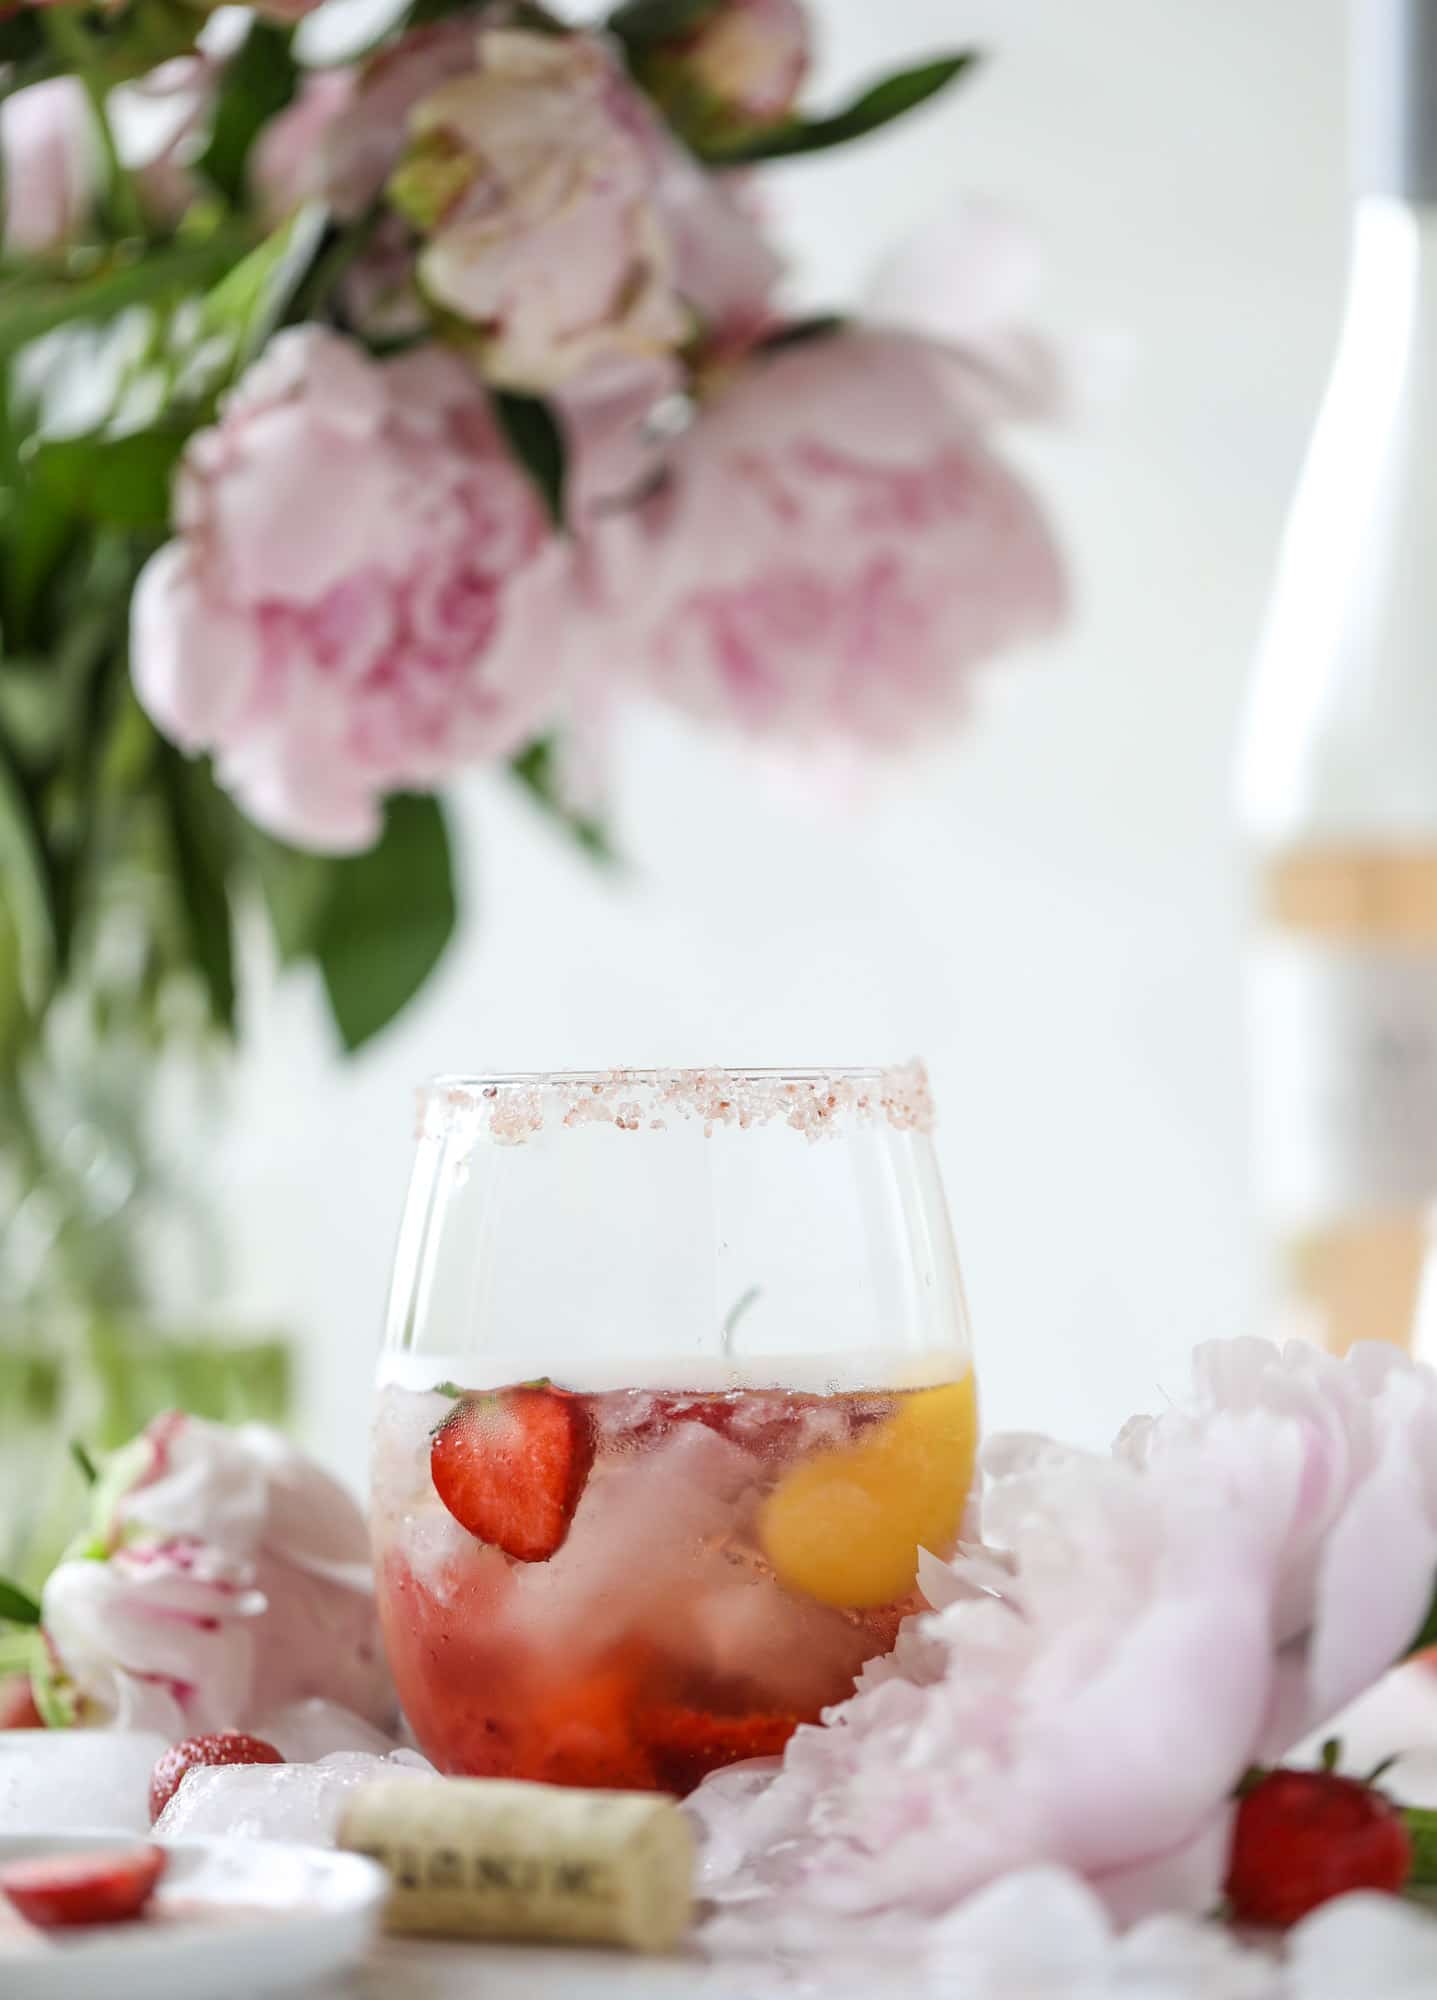 This tequila rosé spritz cocktail is perfectly refreshing for hot summer nights. A mix between a margarita and spritzer, this starts with muddled strawberries and honey, a shot of tequila and is topped off with your favorite rosé wine! I howsweeteats.com #tequila #rosé #wine #spritz #cocktail #strawberries